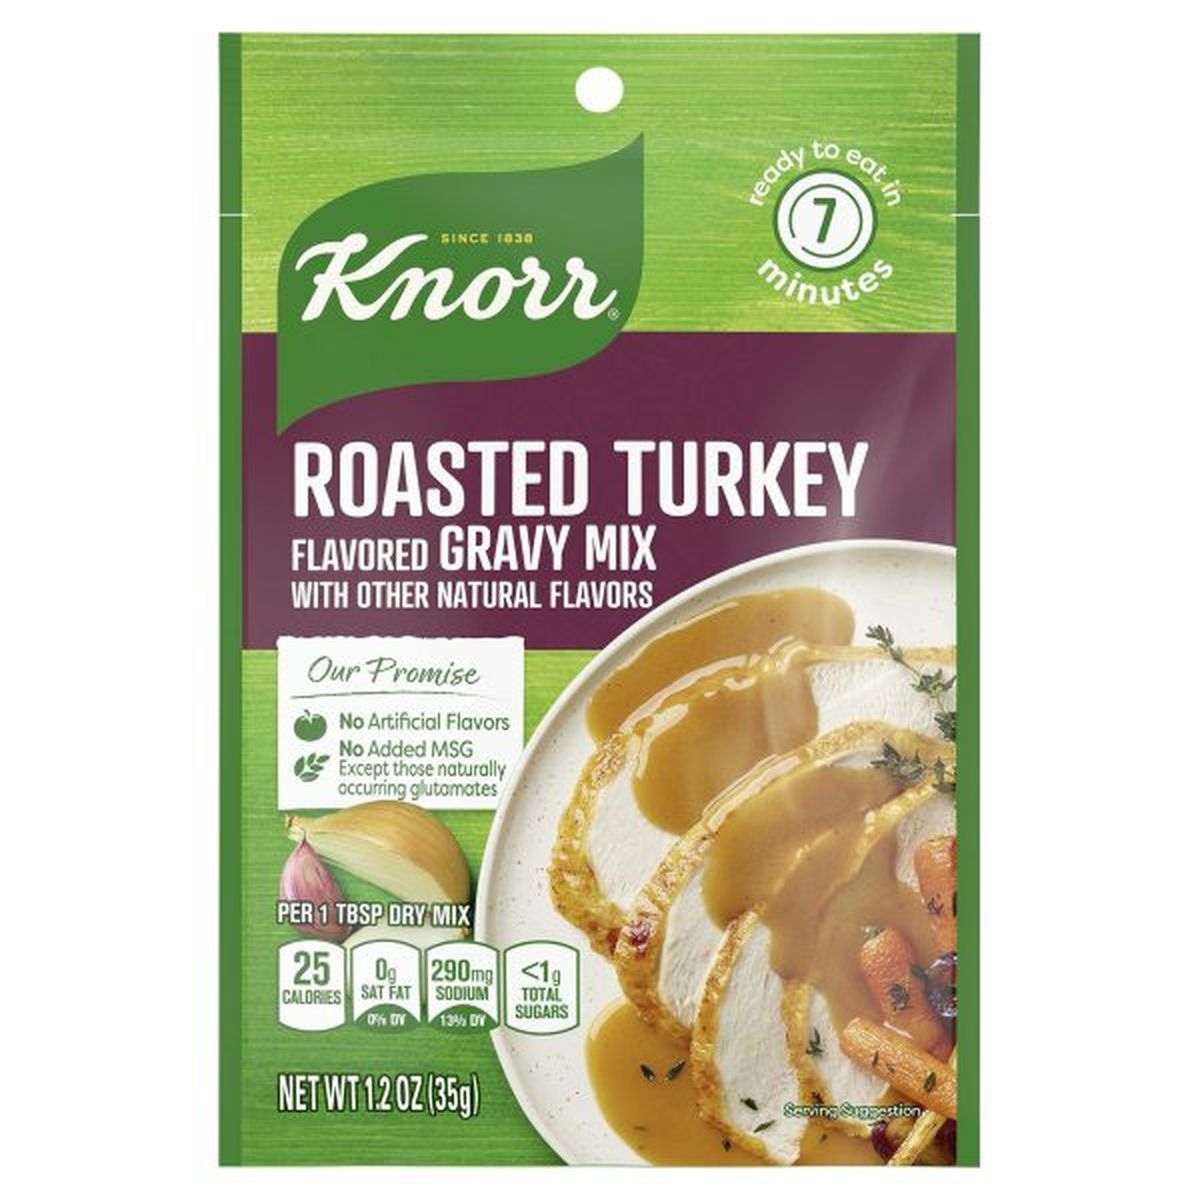 Calories in Knorr Gravy Mix, Roasted Turkey